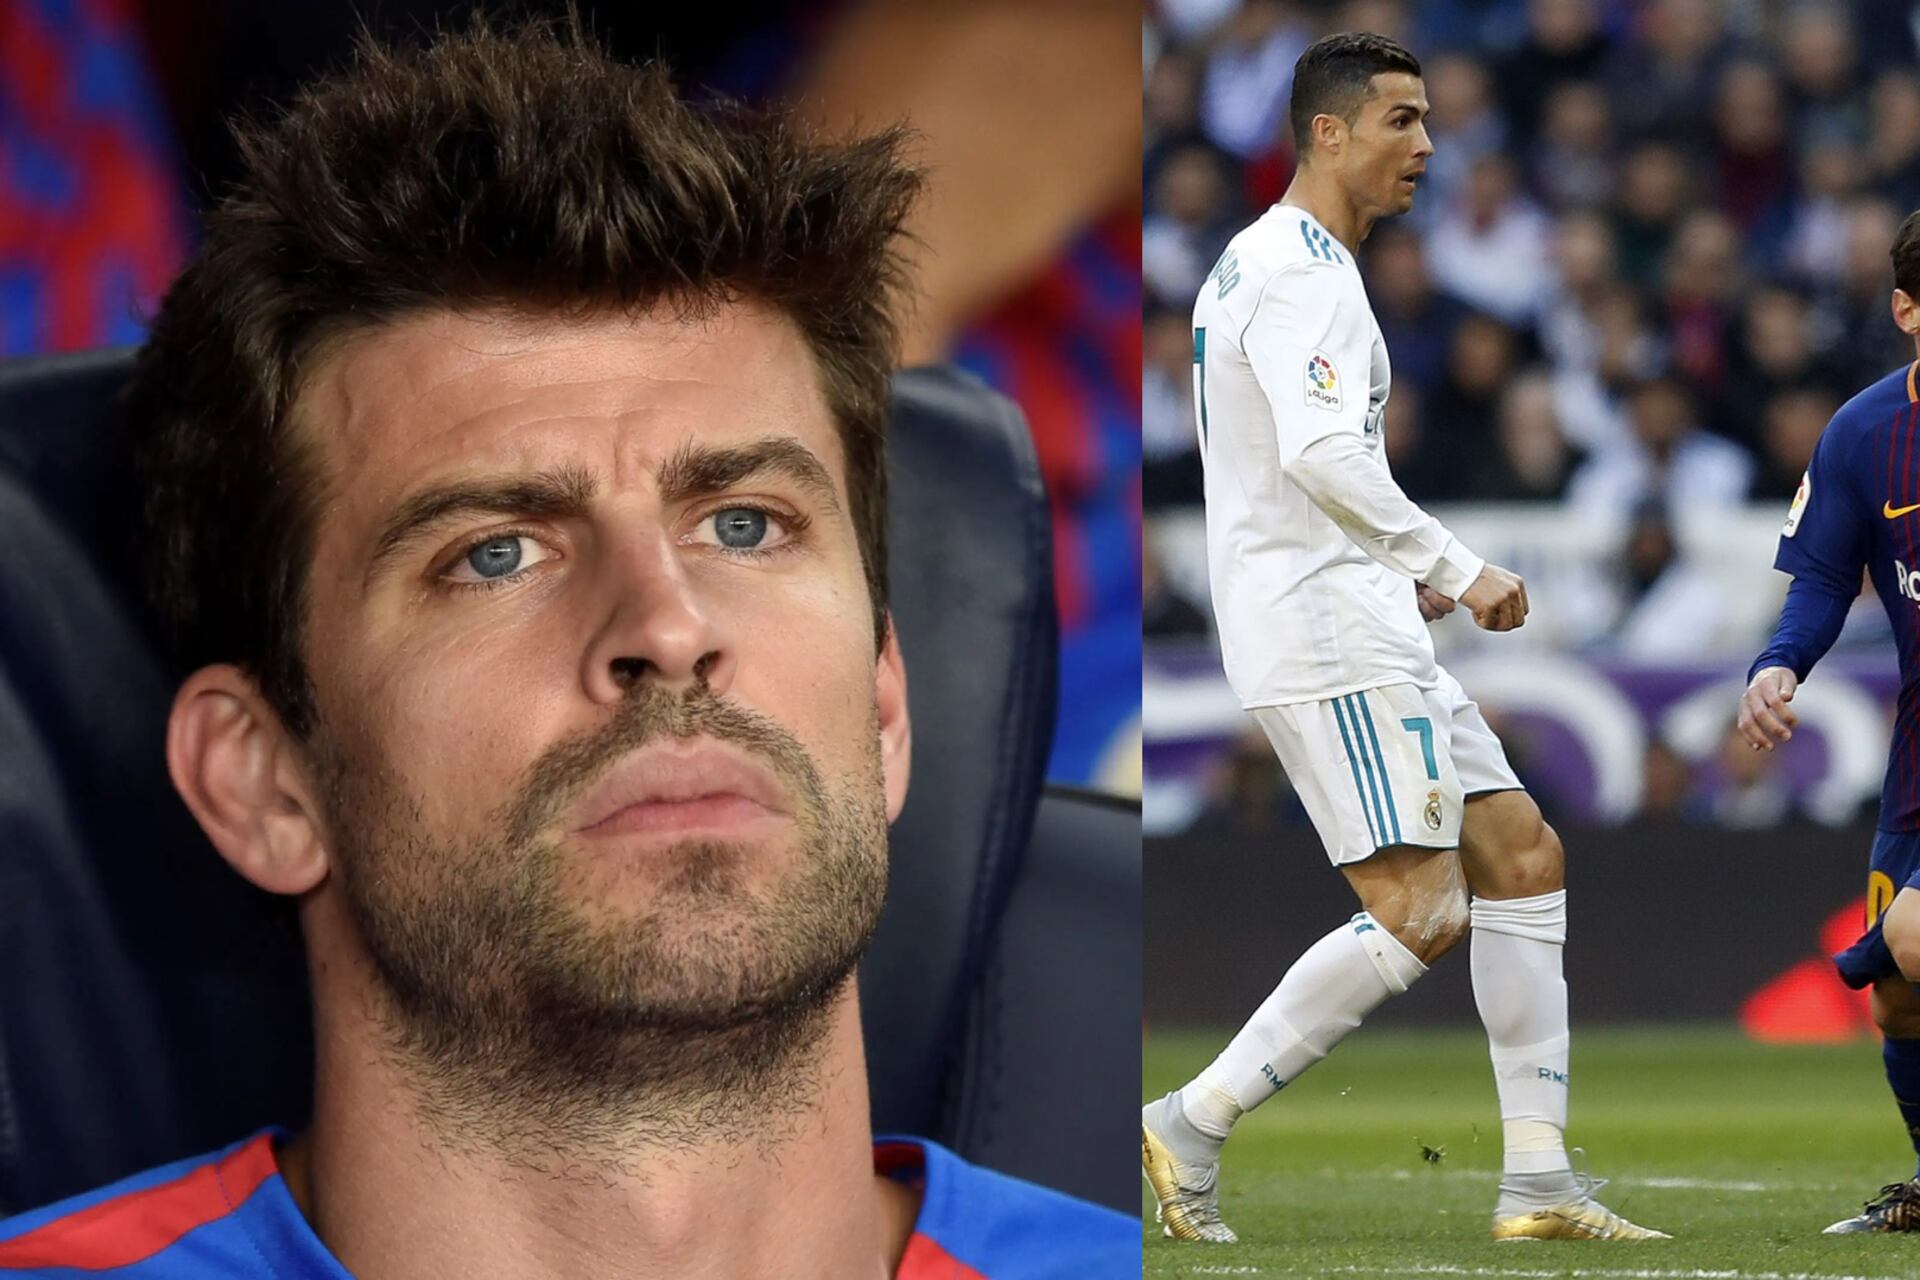 Gerard Pique reveals Messi's thoughts on Ronaldo that surprises football fans